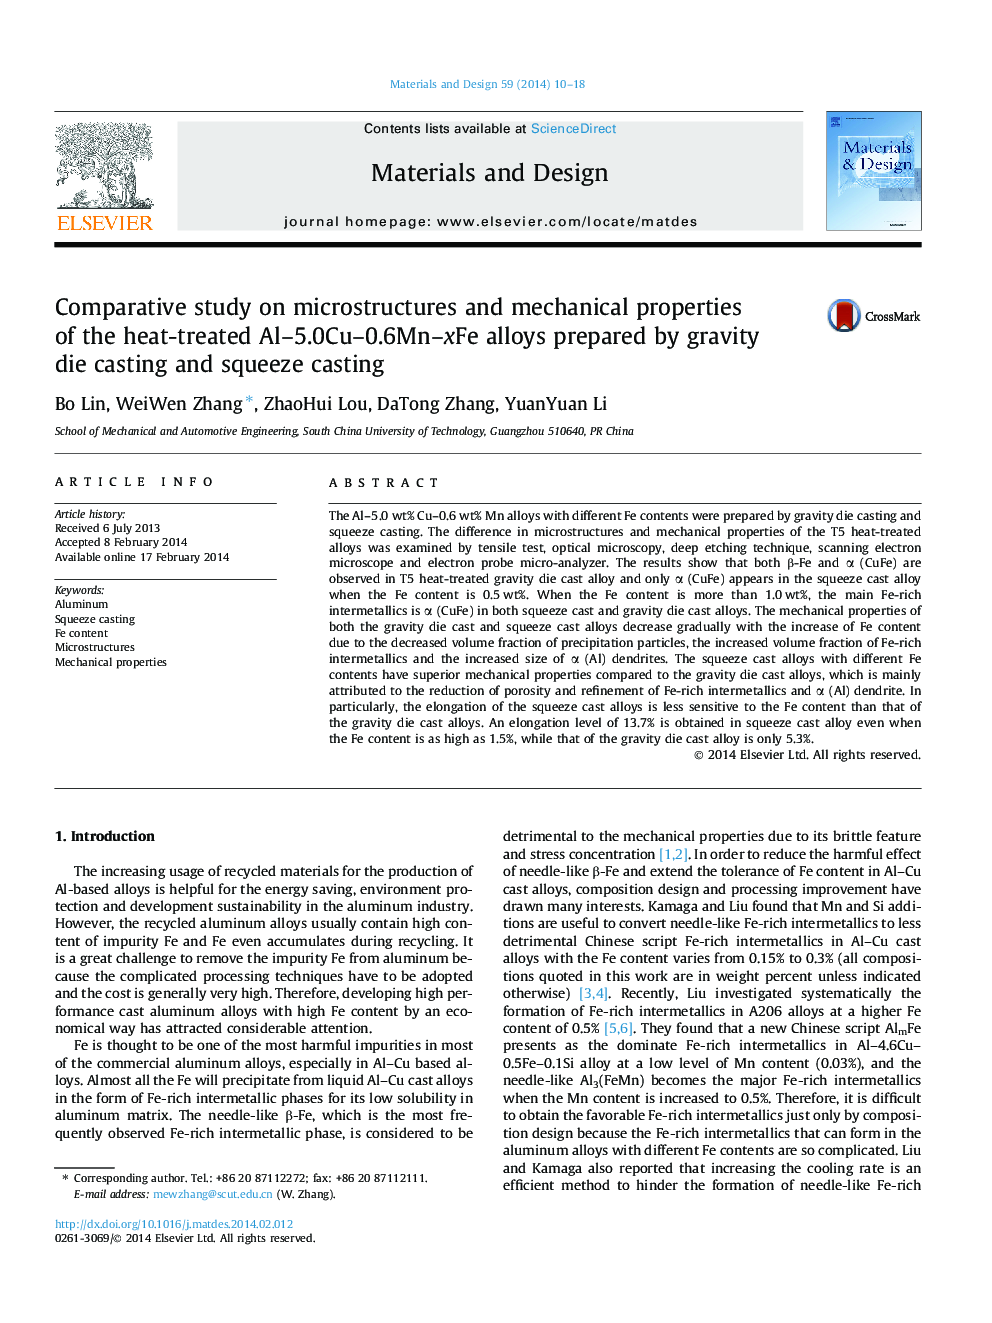 Comparative study on microstructures and mechanical properties of the heat-treated Al-5.0Cu-0.6Mn-xFe alloys prepared by gravity die casting and squeeze casting